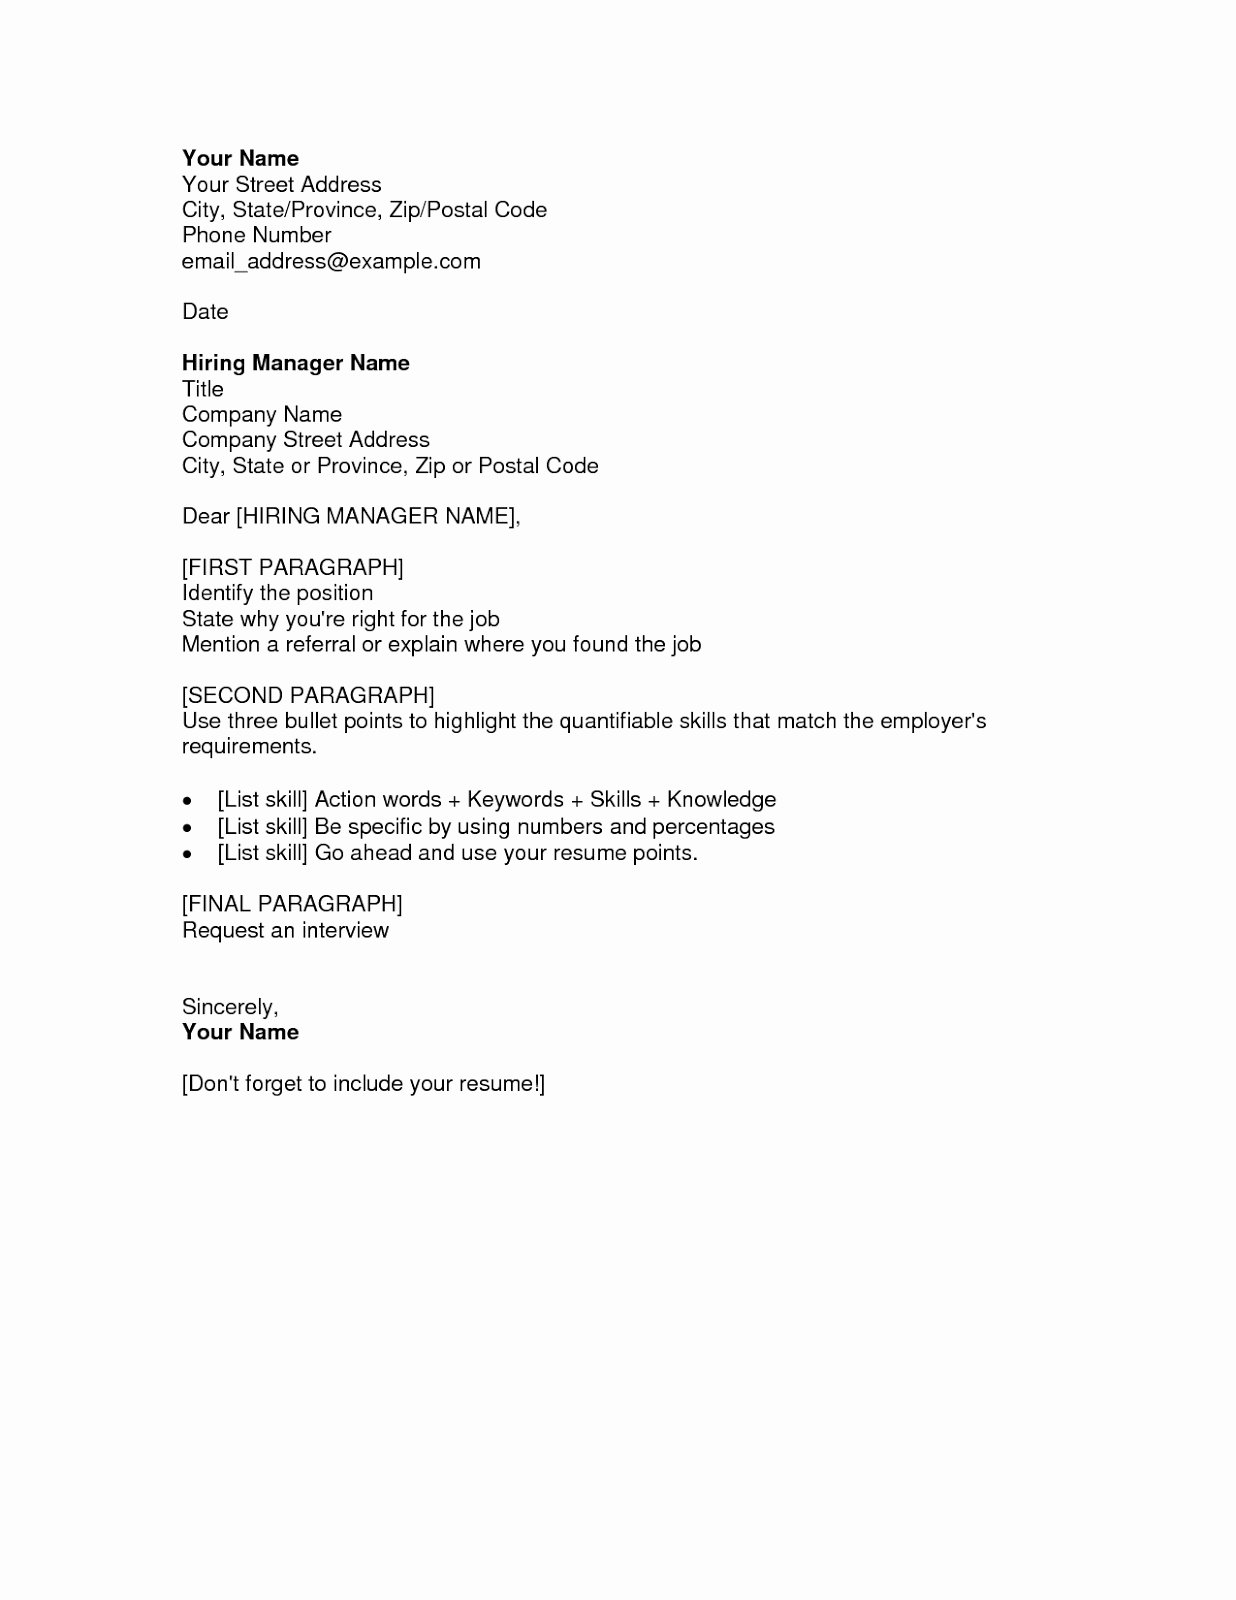 Free Cover Letter Samples for Resumes